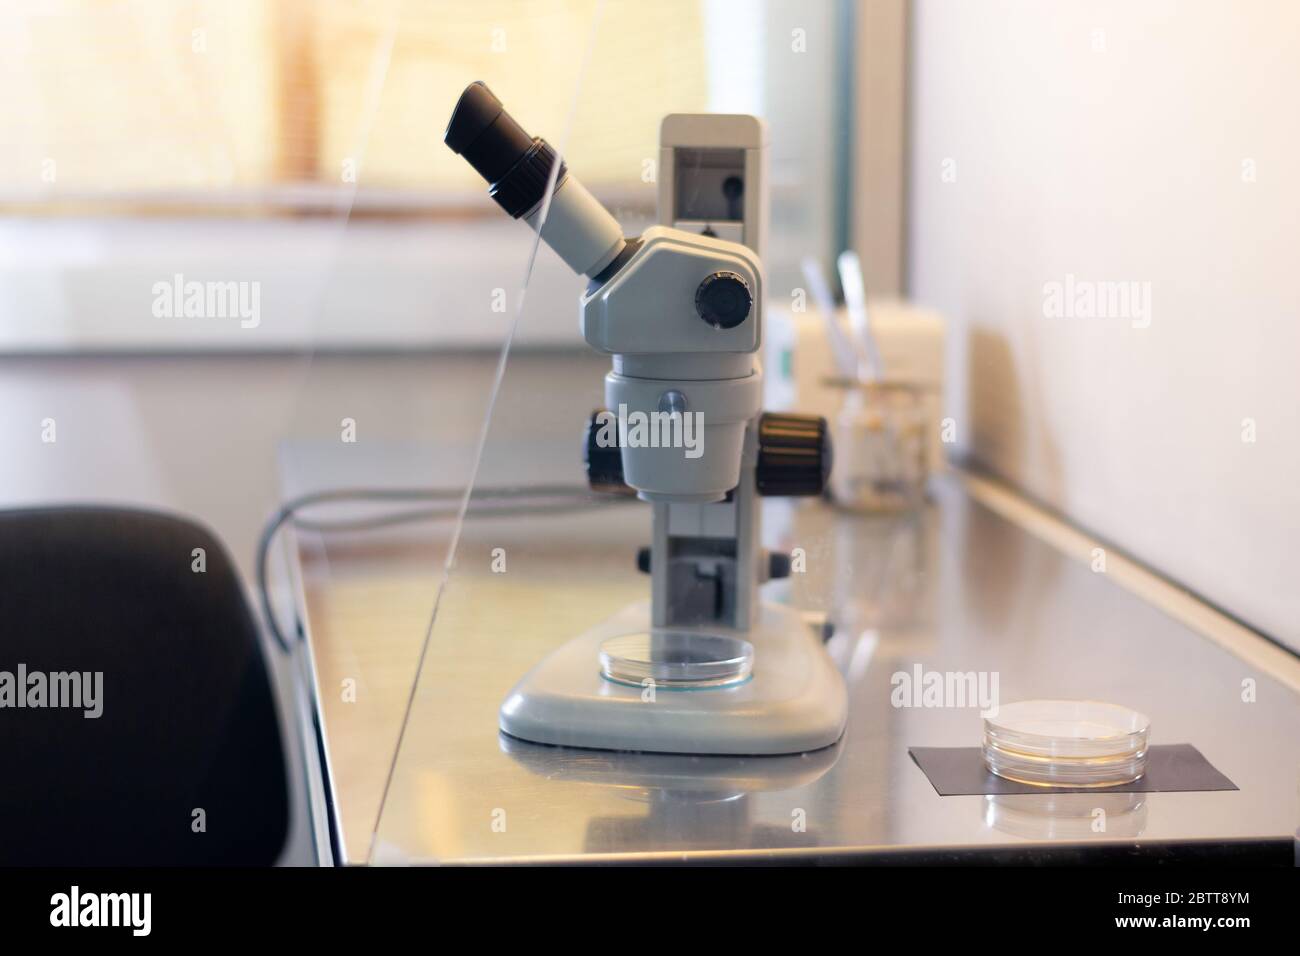 Stereo microscope inside a laminar flow cabinet used to tissue culture in petri dishes for research purposes in laboratory Stock Photo